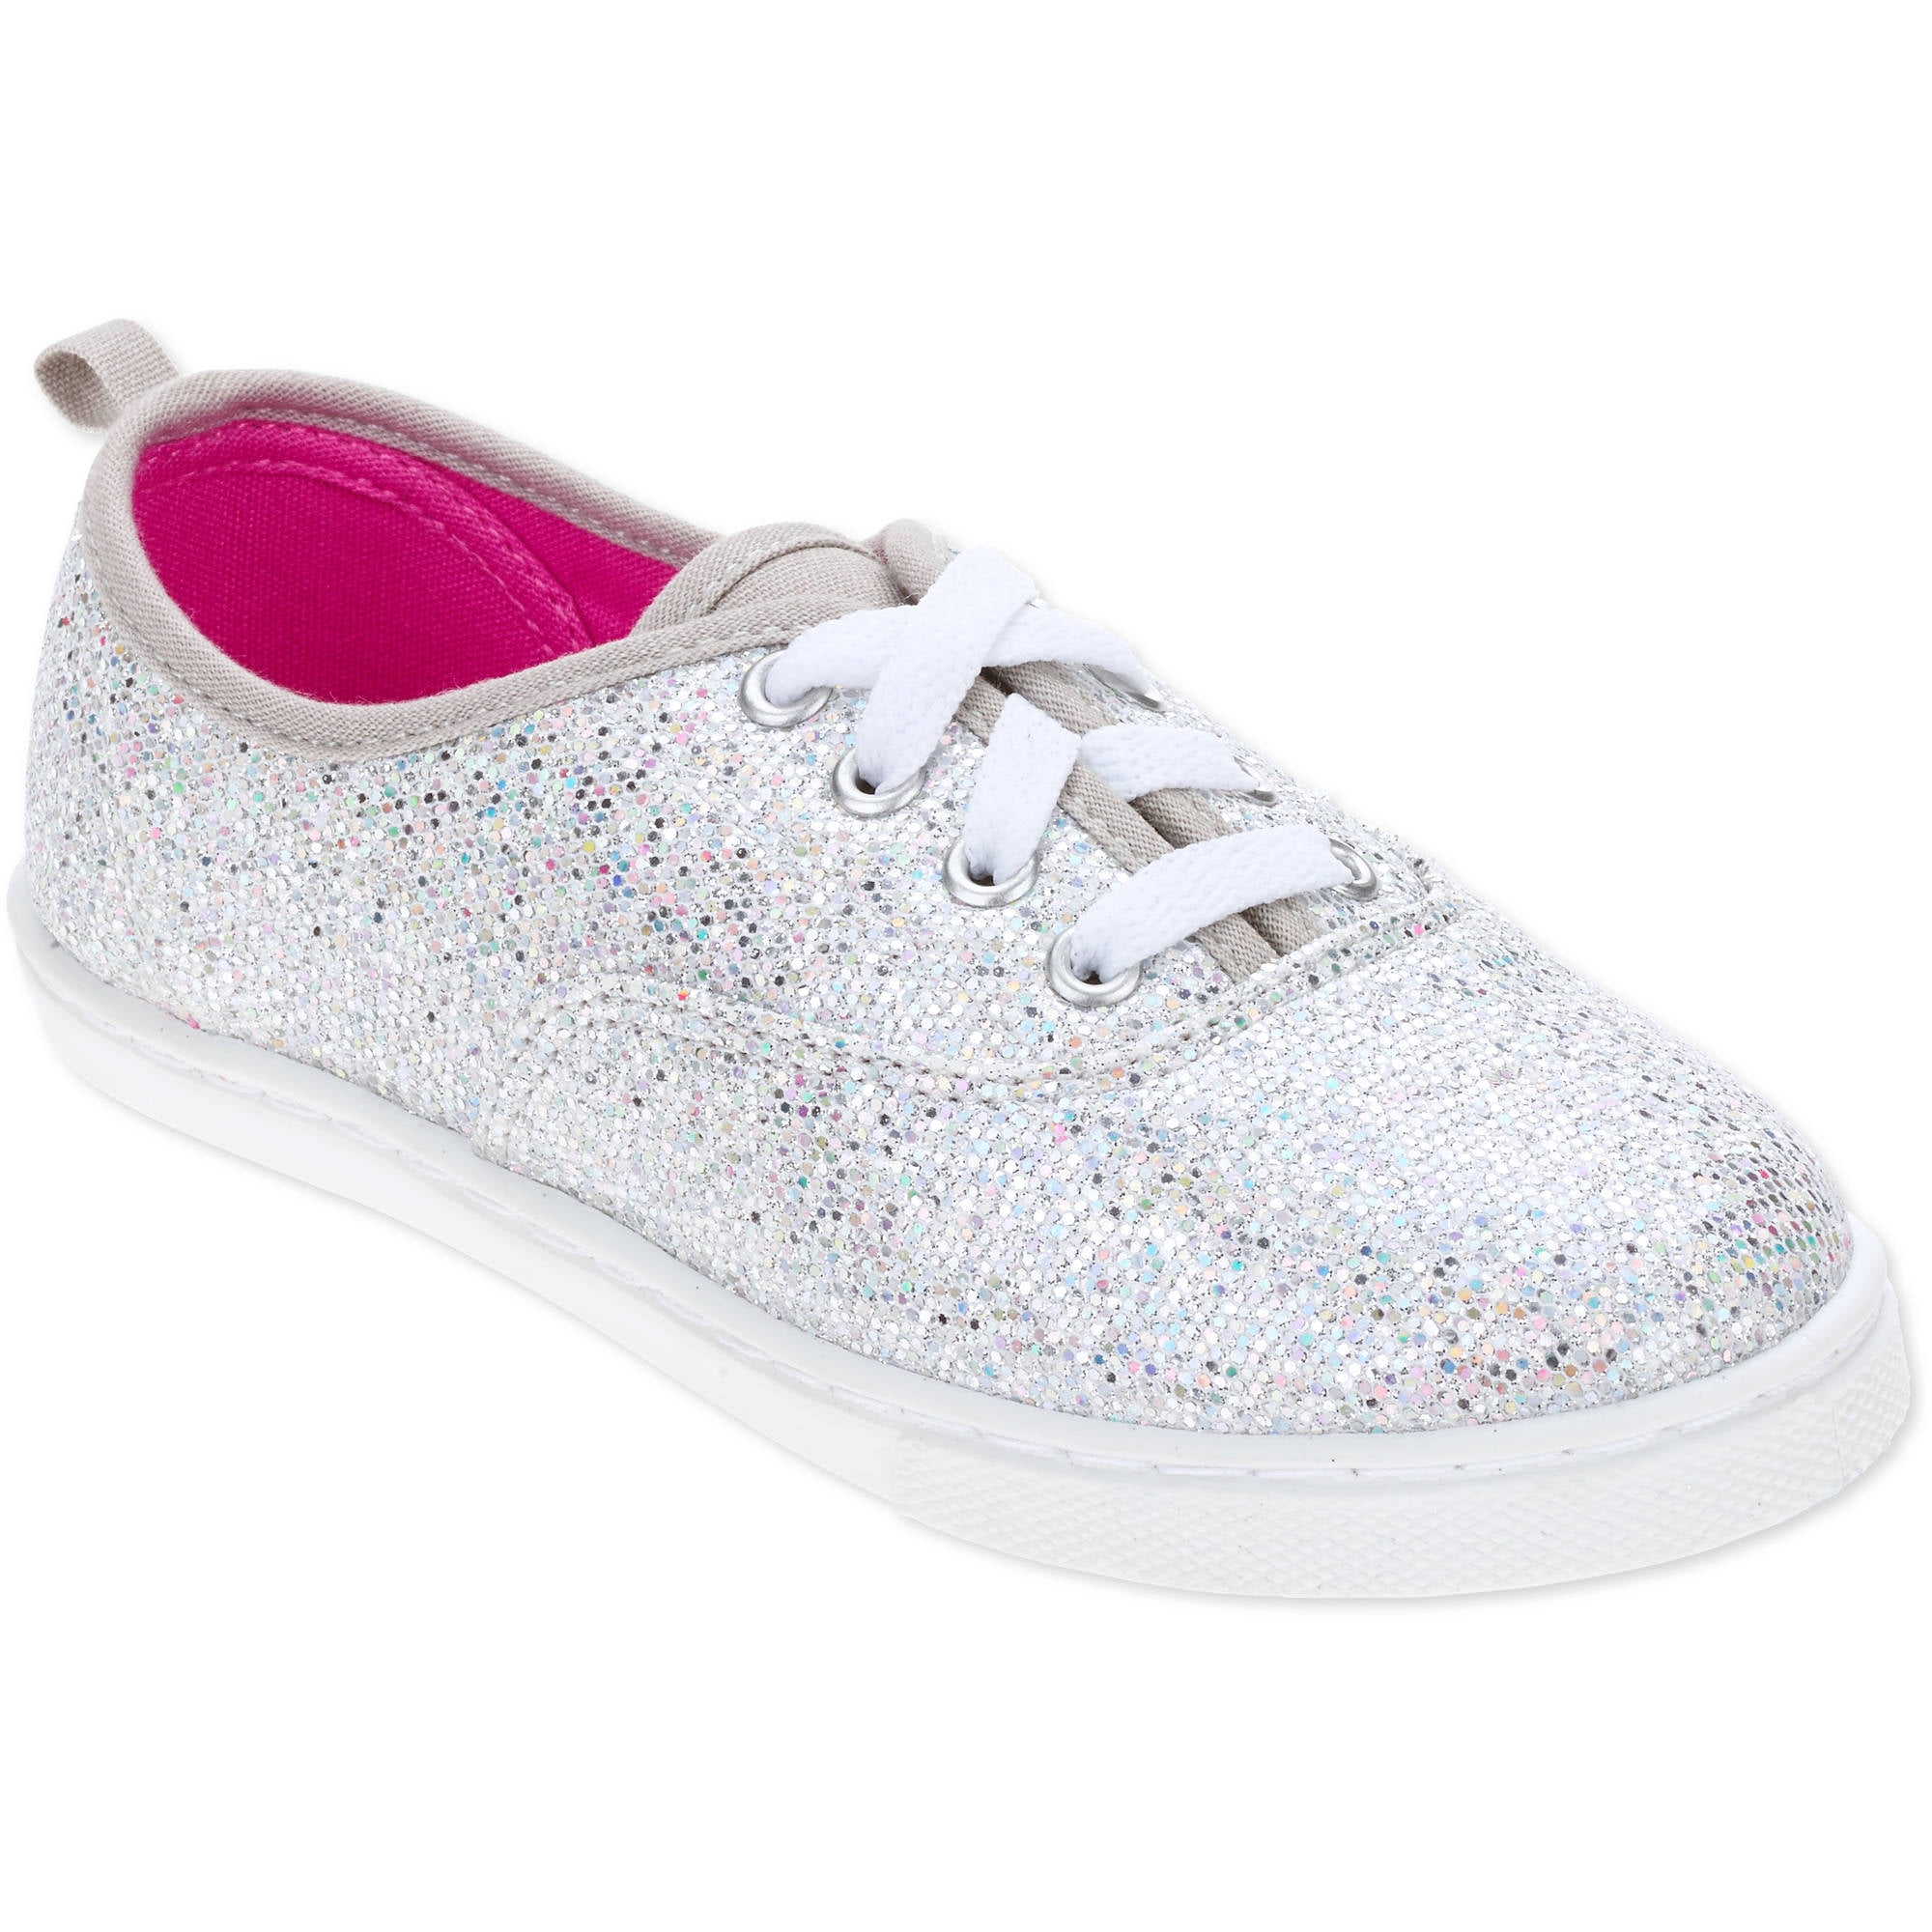 Faded Glory Girls Glitter Lace-up Canvas Casual Shoe Size 3 Hot Pink Sparkly 